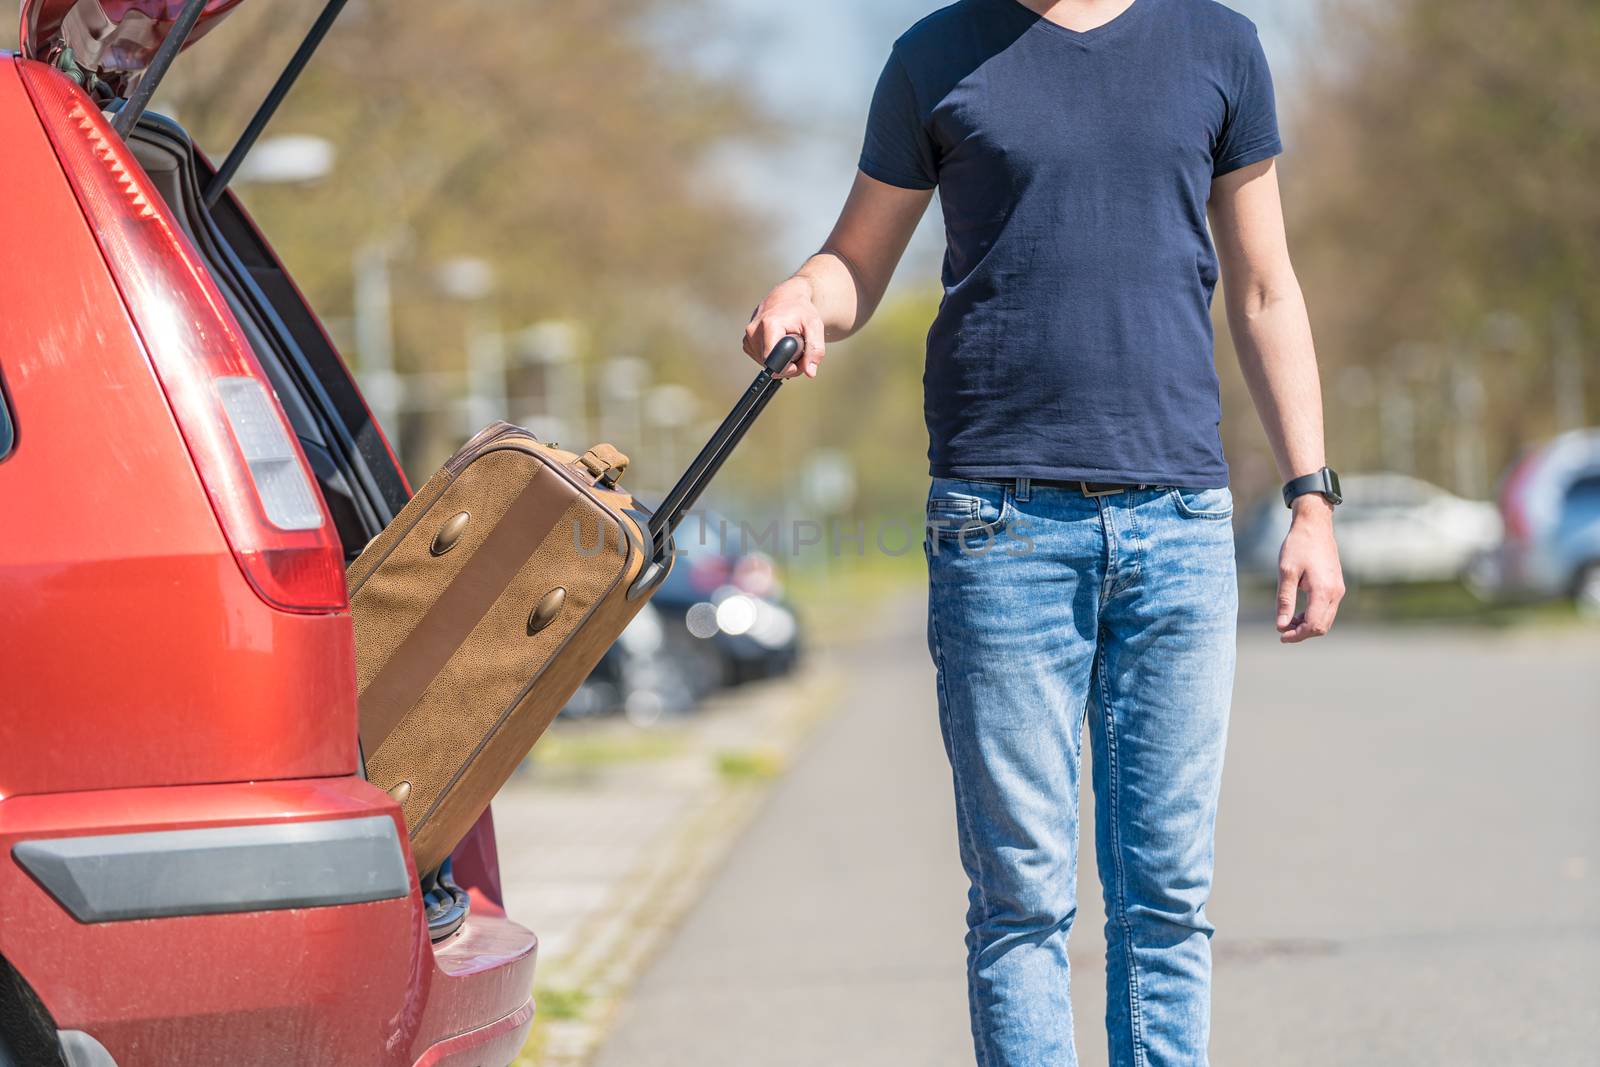 The young man pulls luggage from the car trunk by Edophoto